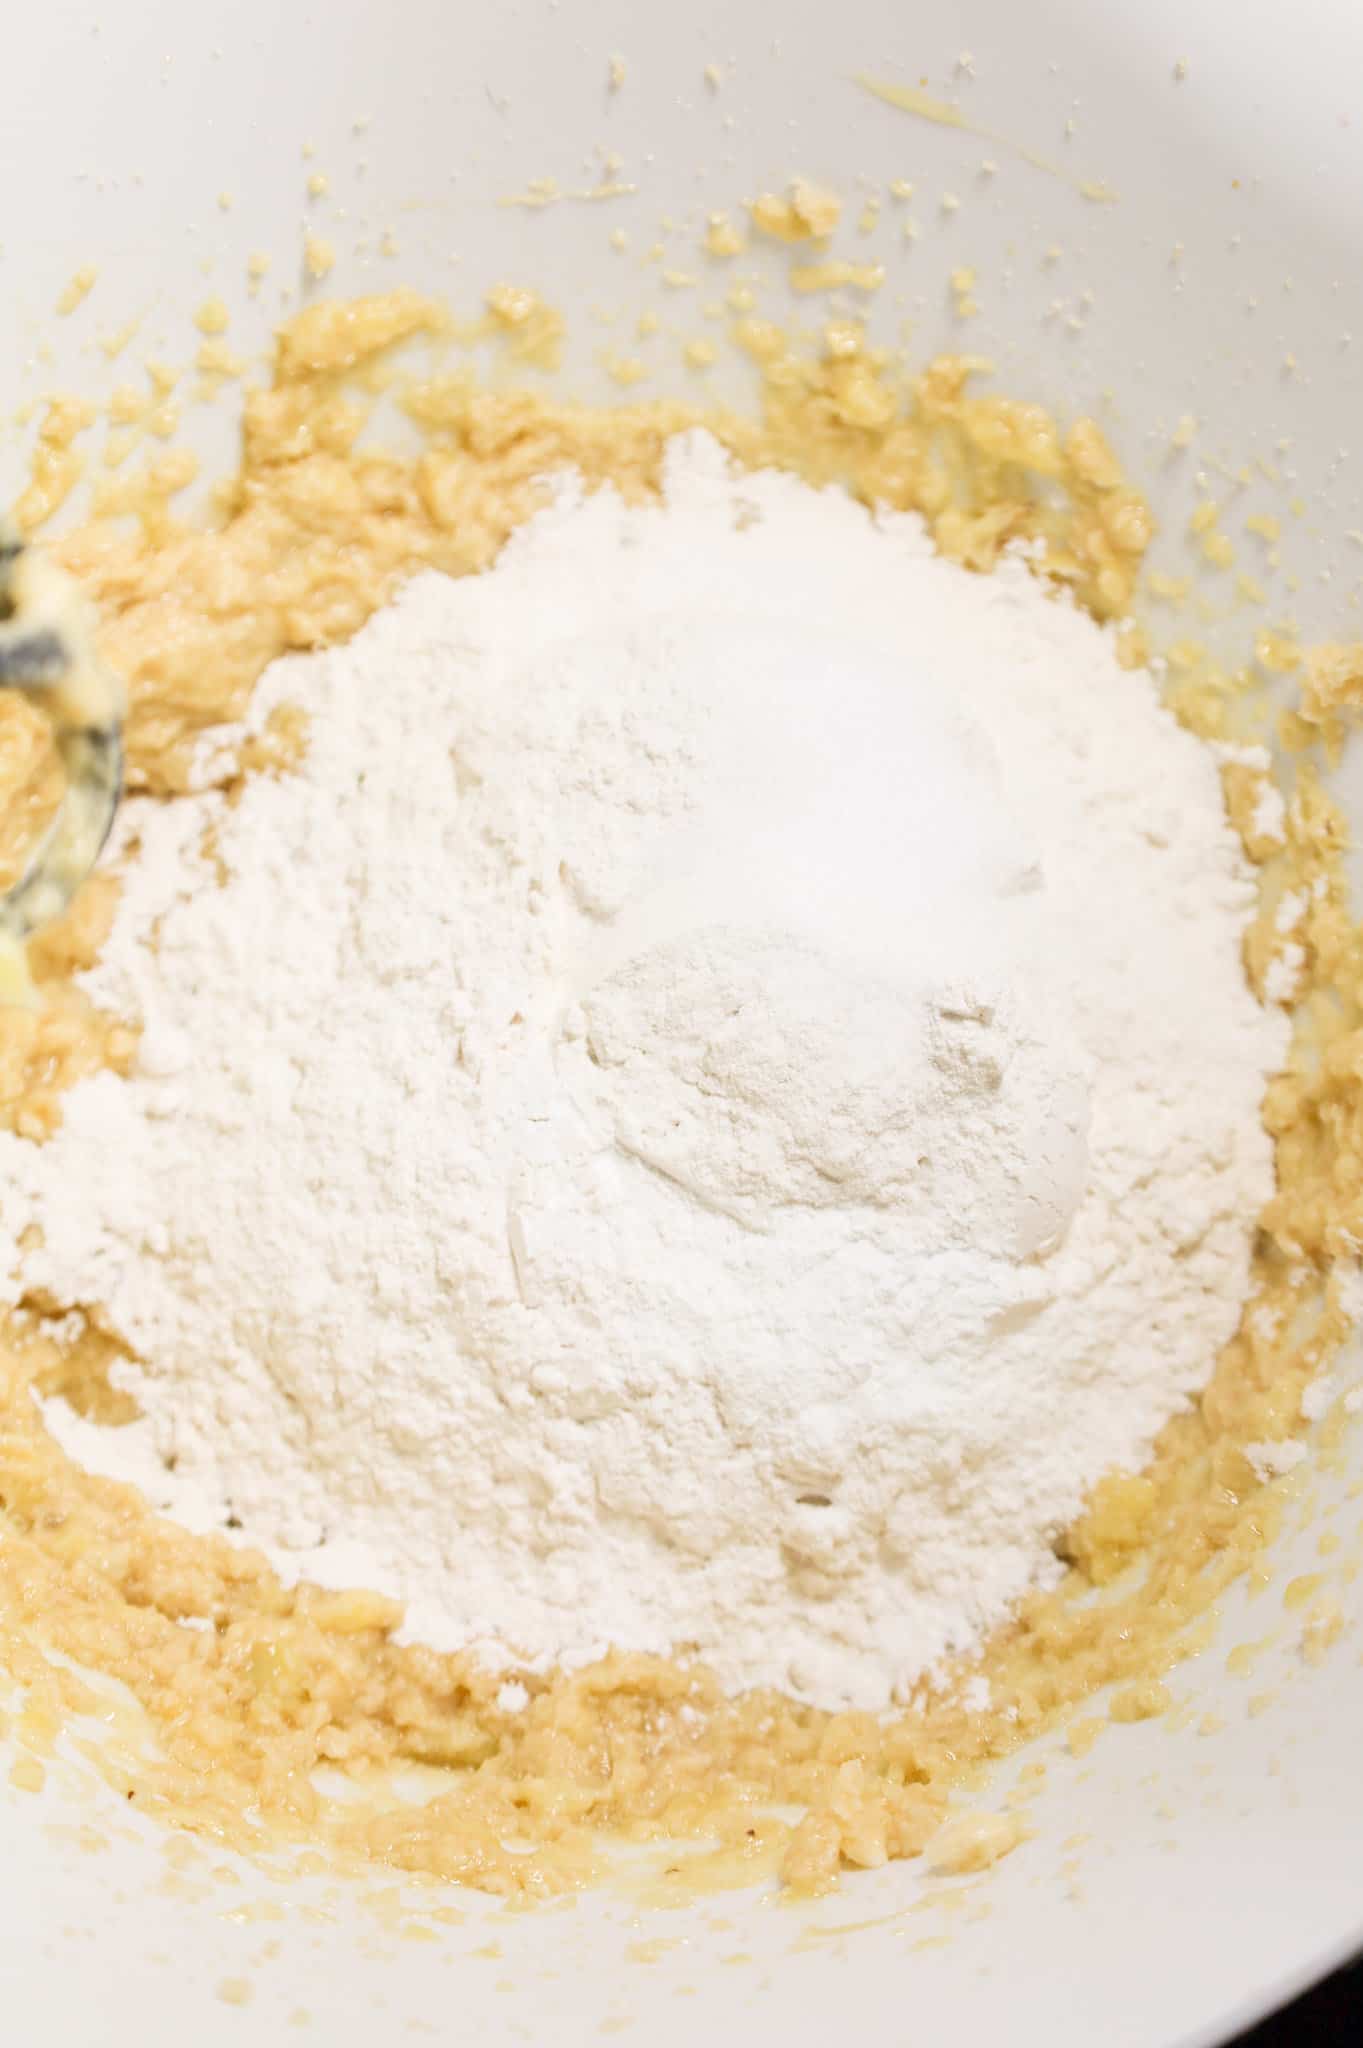 flour added to bowl with banana batter mixture